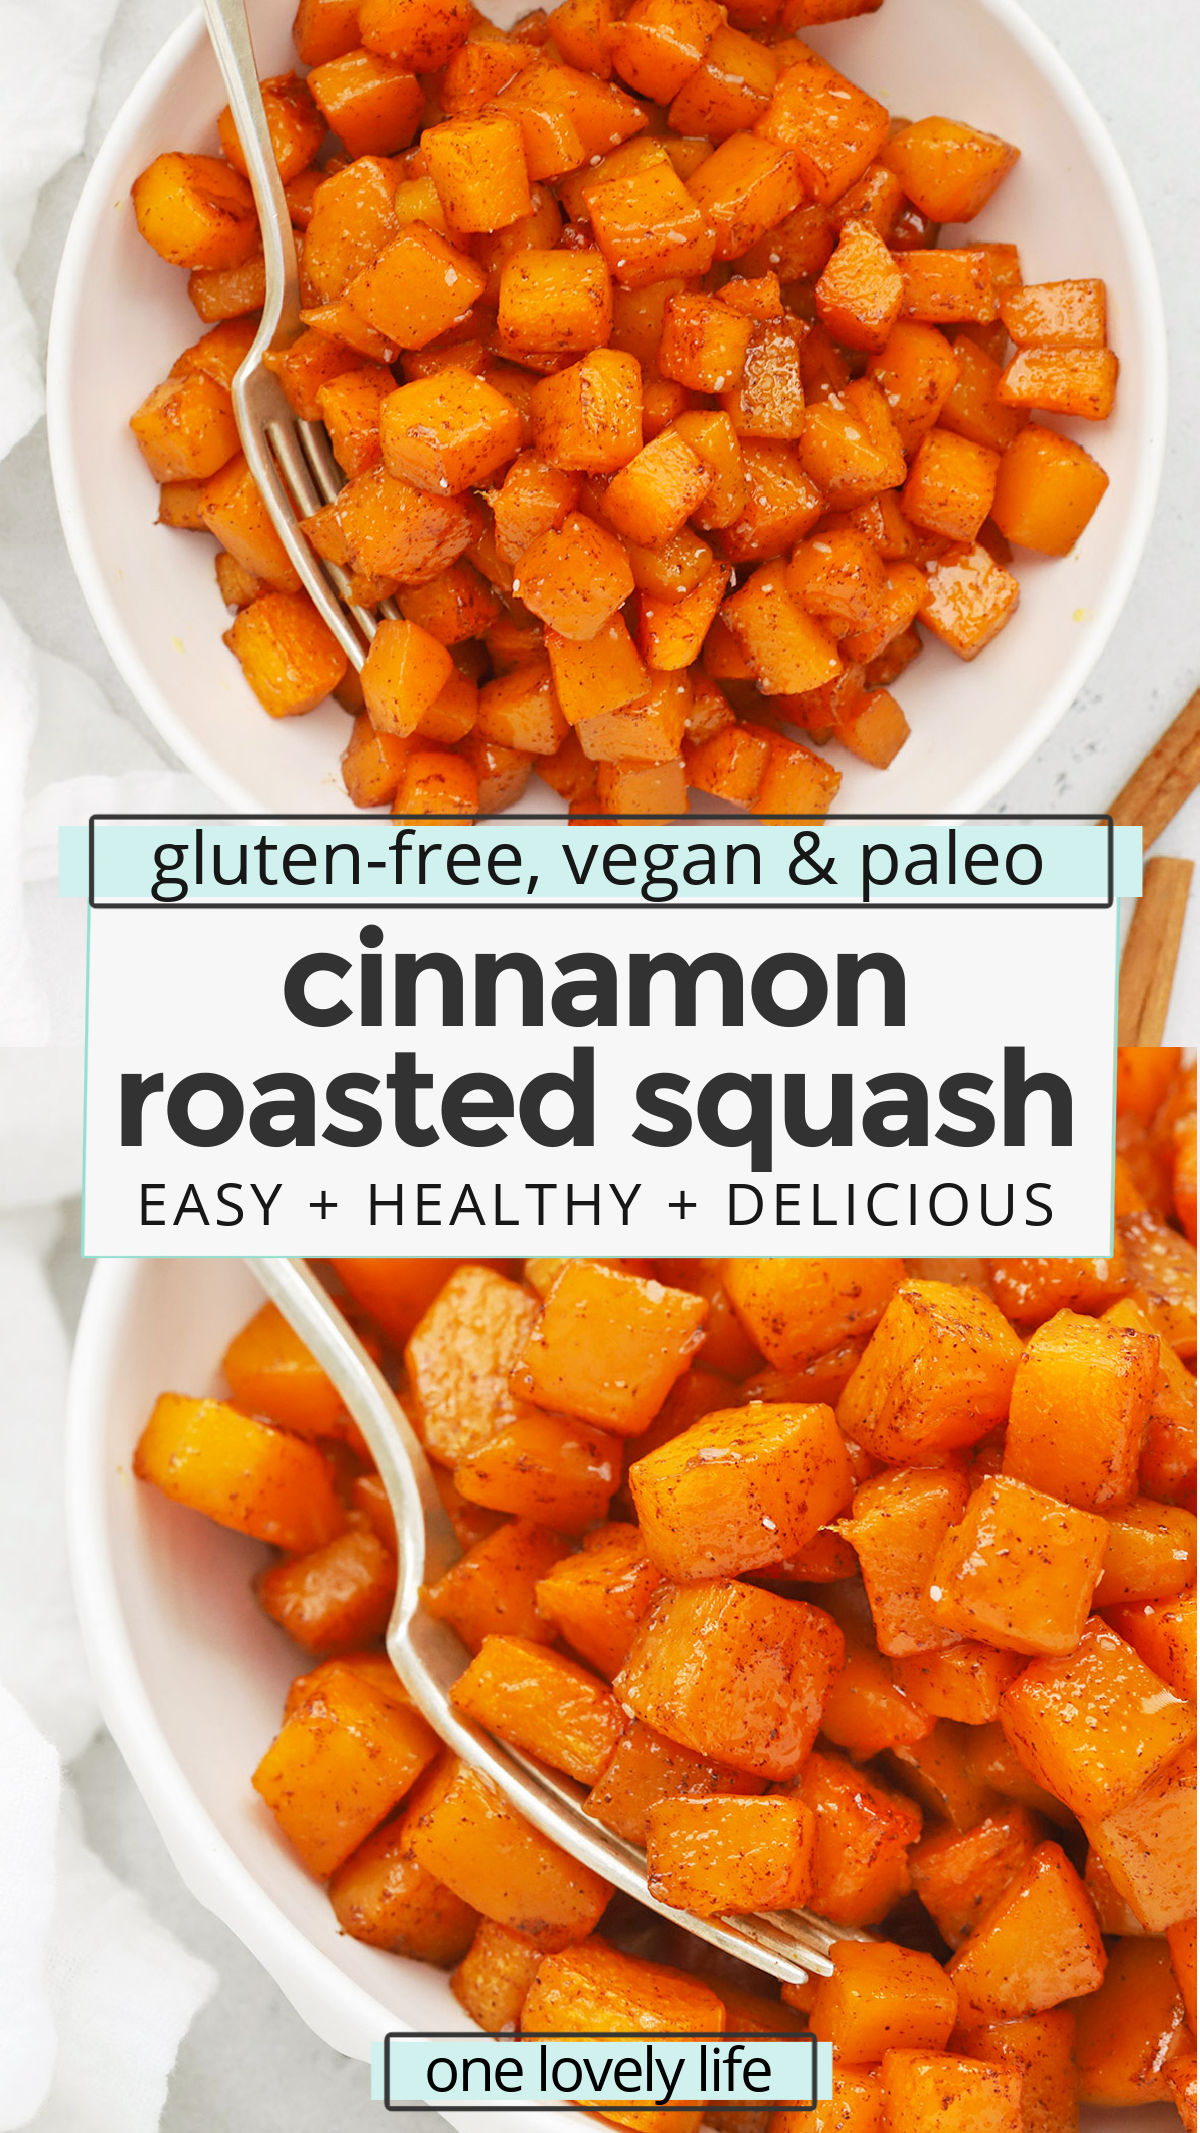 Roasted Cinnamon Butternut Squash - this easy cinnamon squash is such an easy fall side dish! Perfect for Thanksgiving! (allergy-free, vegan, paleo) // Thanksgiving side dish // Healthy side dish // Healthy thanksgiving recipes // Roasted squash recipe // Cinnamon Squash Recipe // Paleo Thanksgiving Recipes // Vegan Thanksgiving Recipes // Gluten Free Thanksgiving Recipes // Roasted cinnamon squash